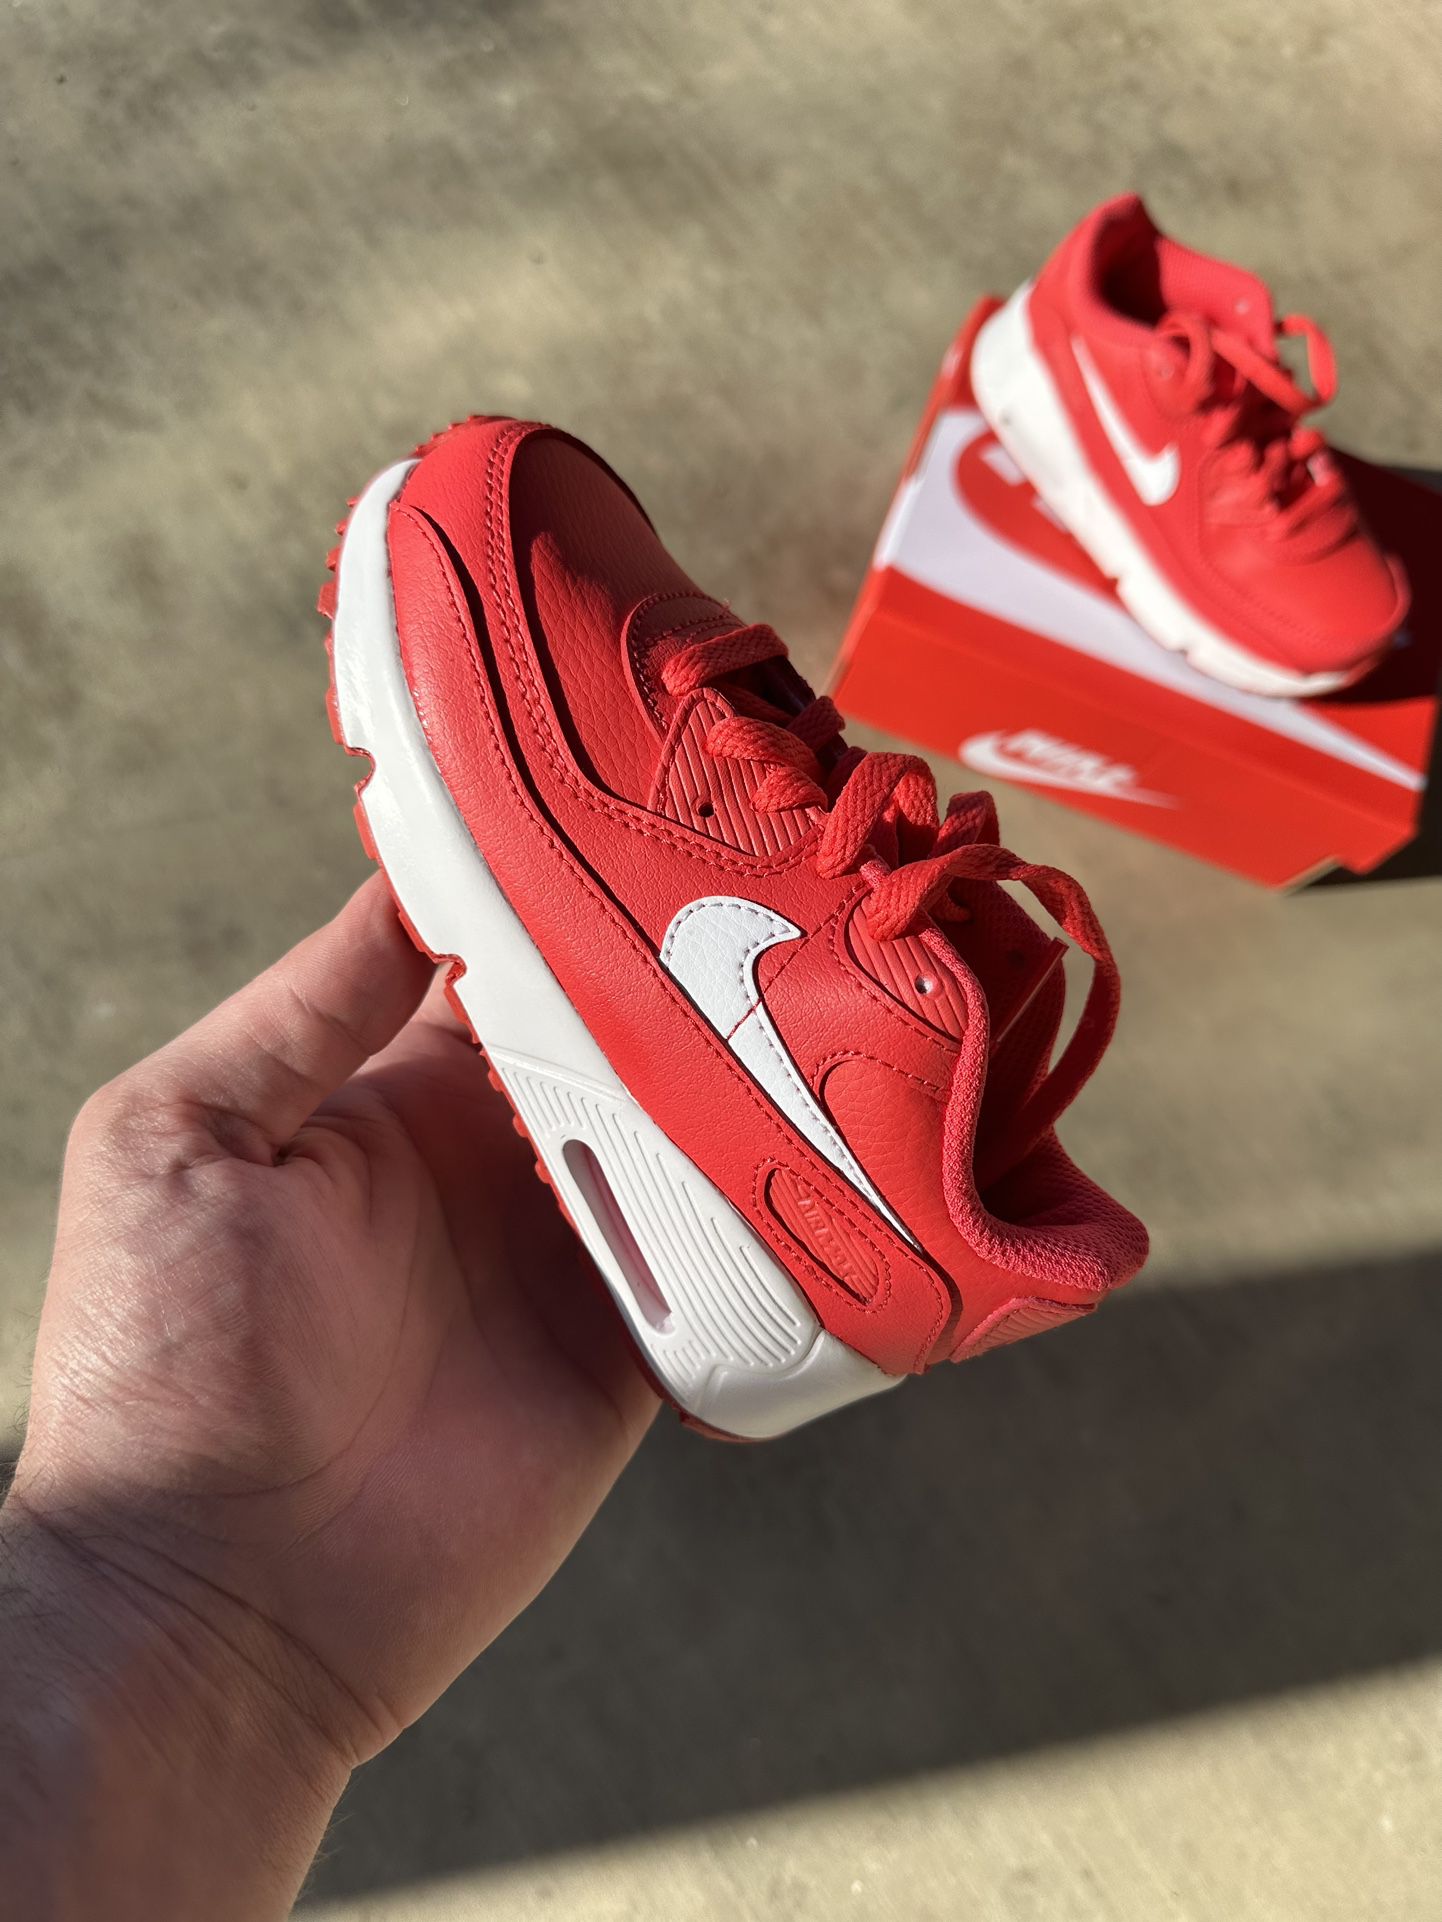 New Nike Air Max 90 LTR Red & White Toddler Size 10c